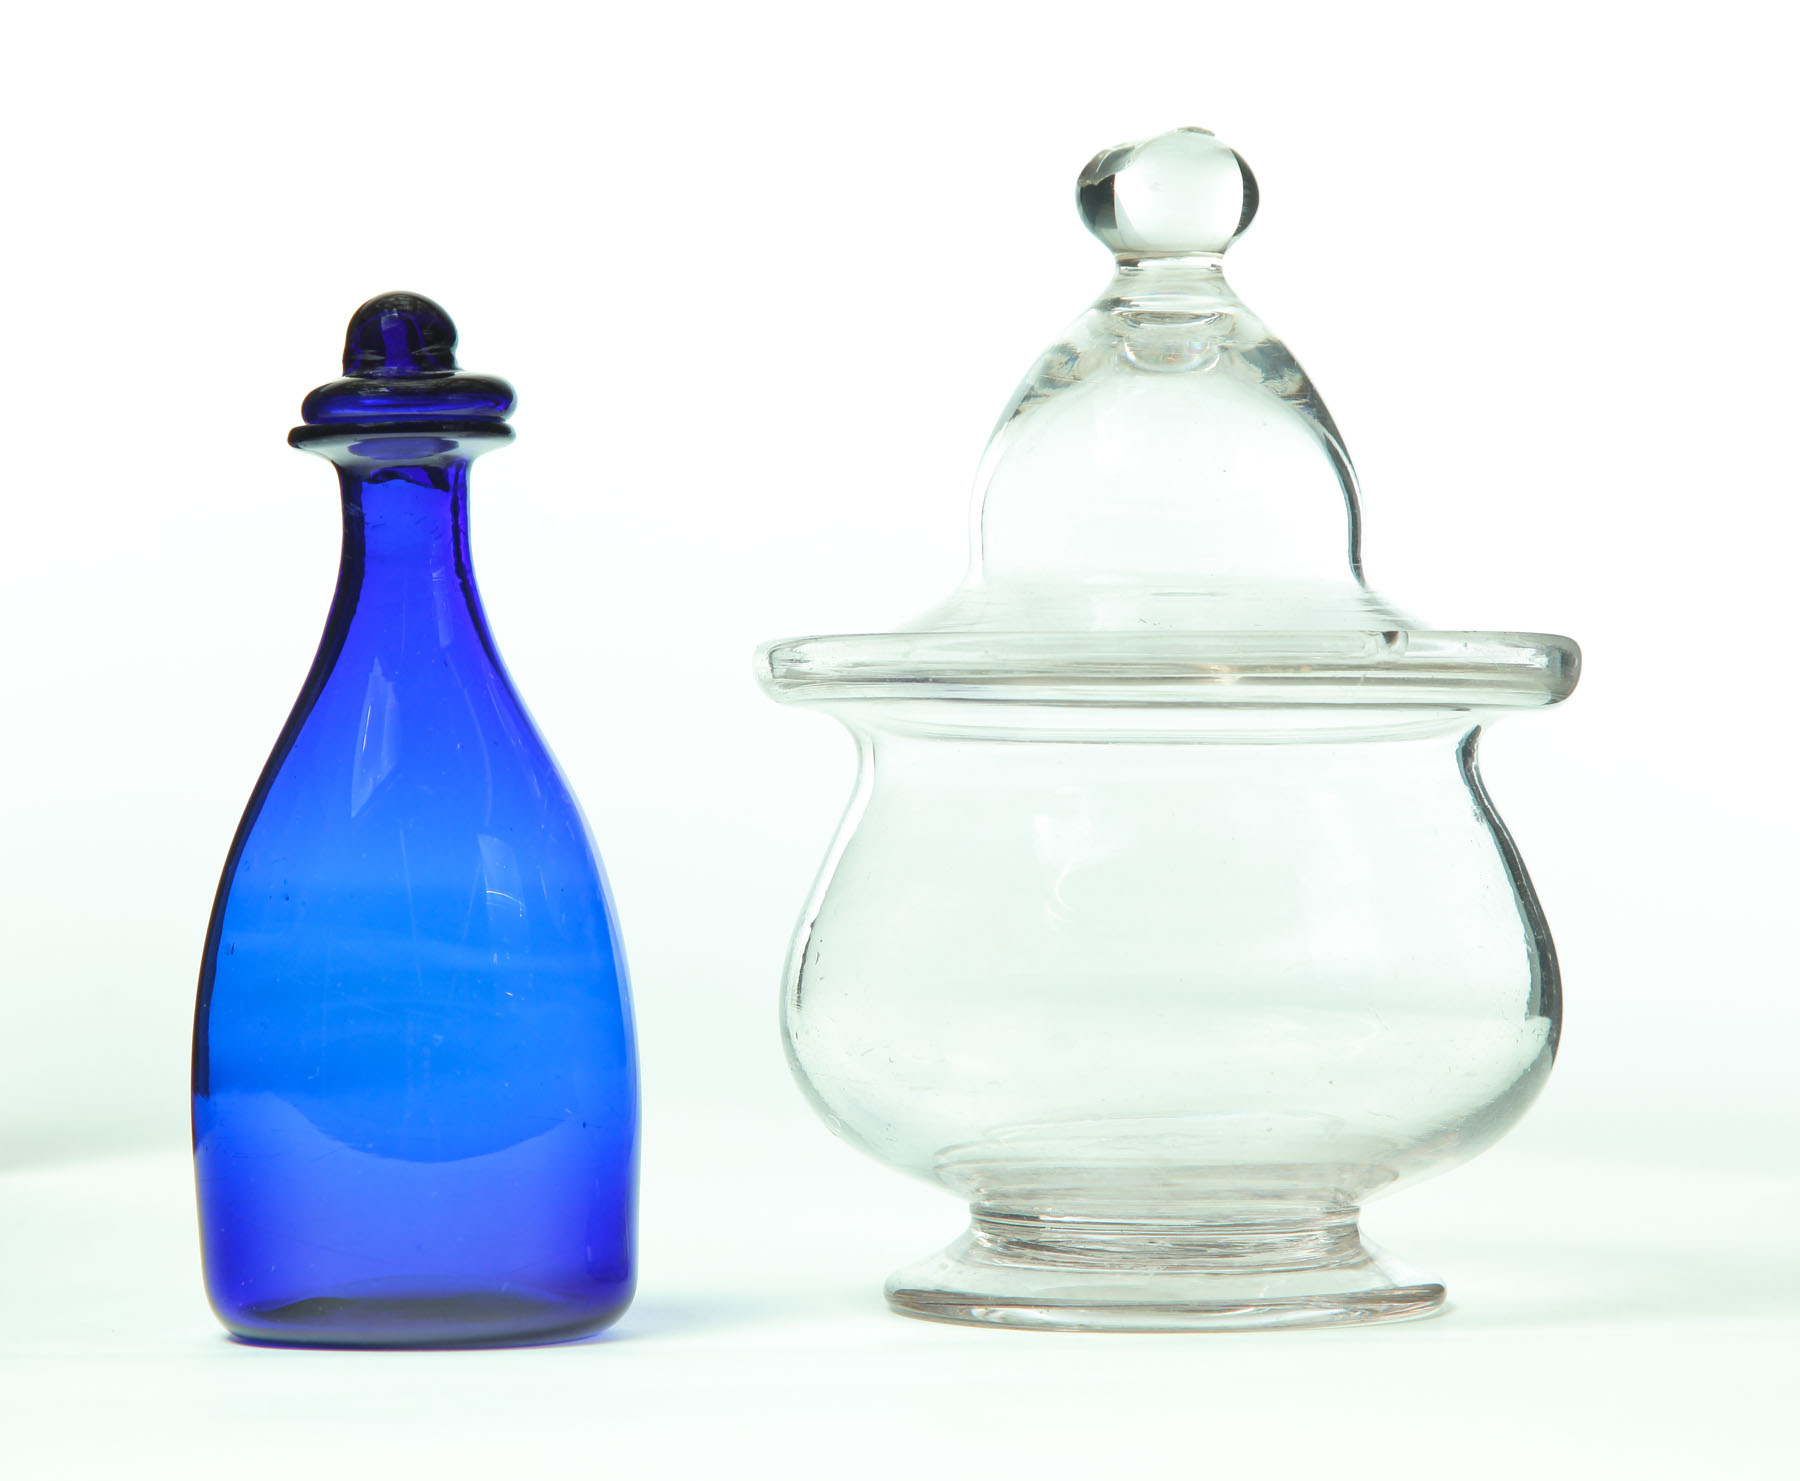 GLASS SUGAR BOWL AND BOTTLE.  Mid